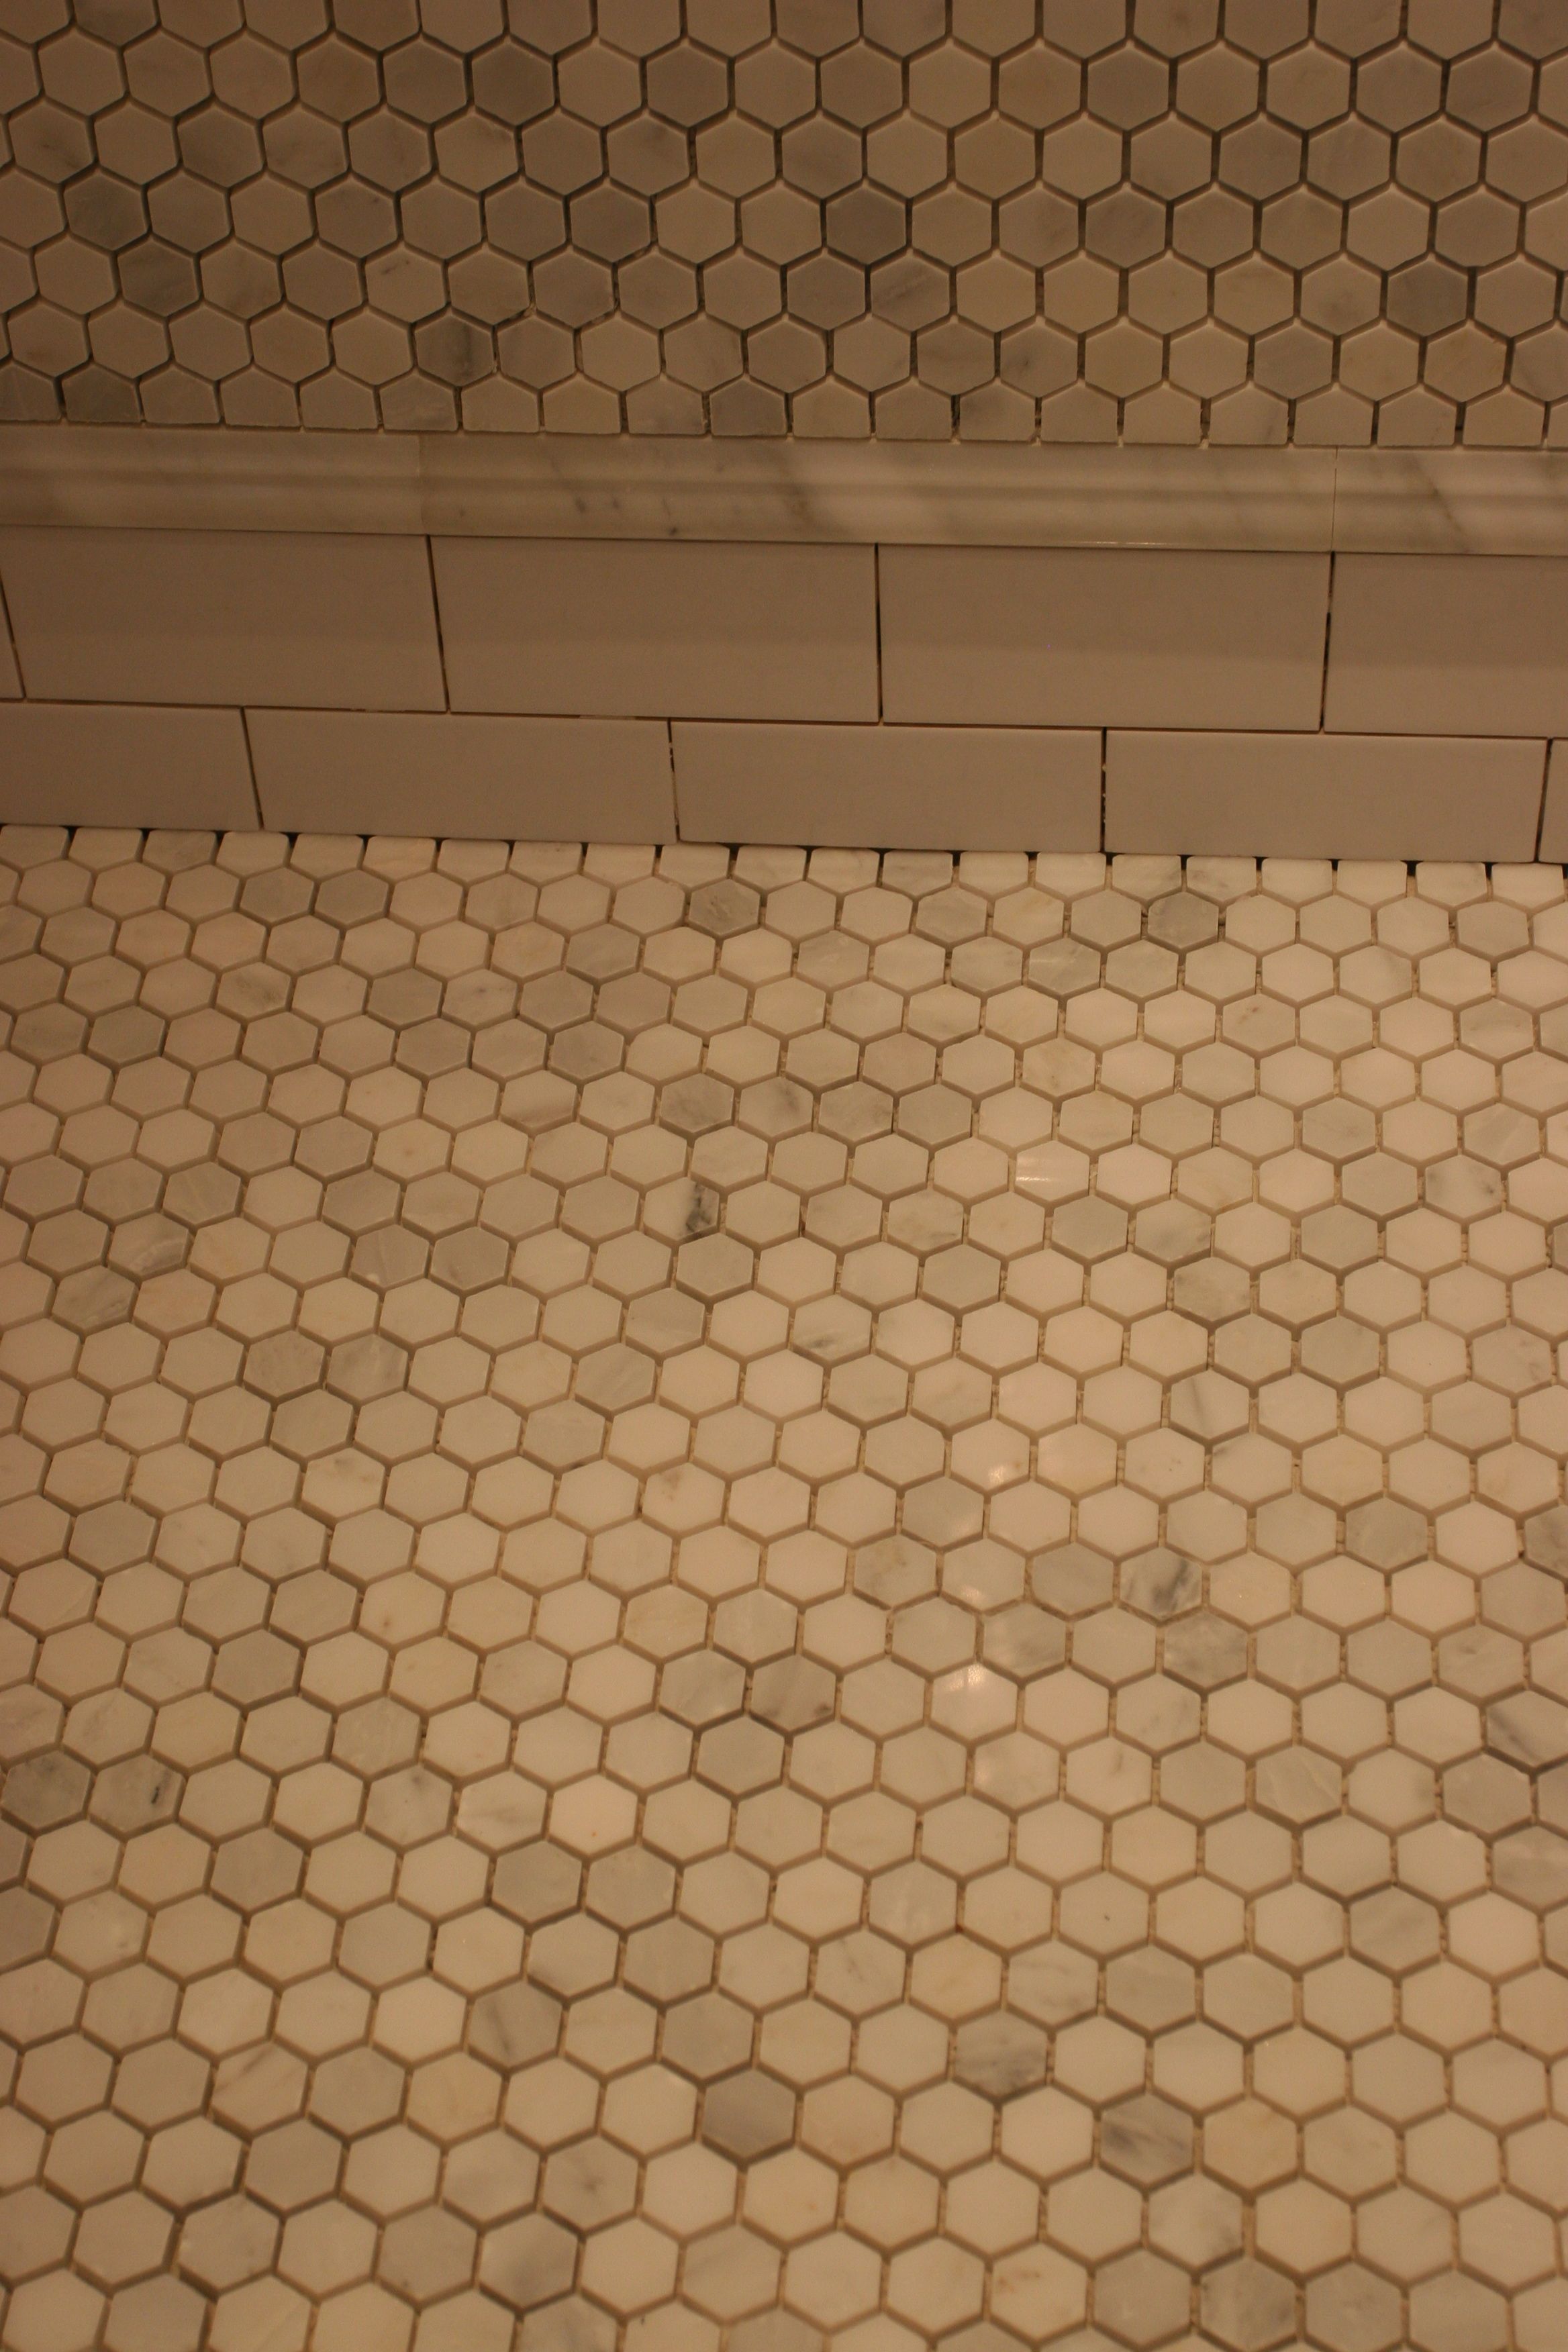 The wall, the skirt, the shower floor. These will look different after the grout goes on tomorrow.